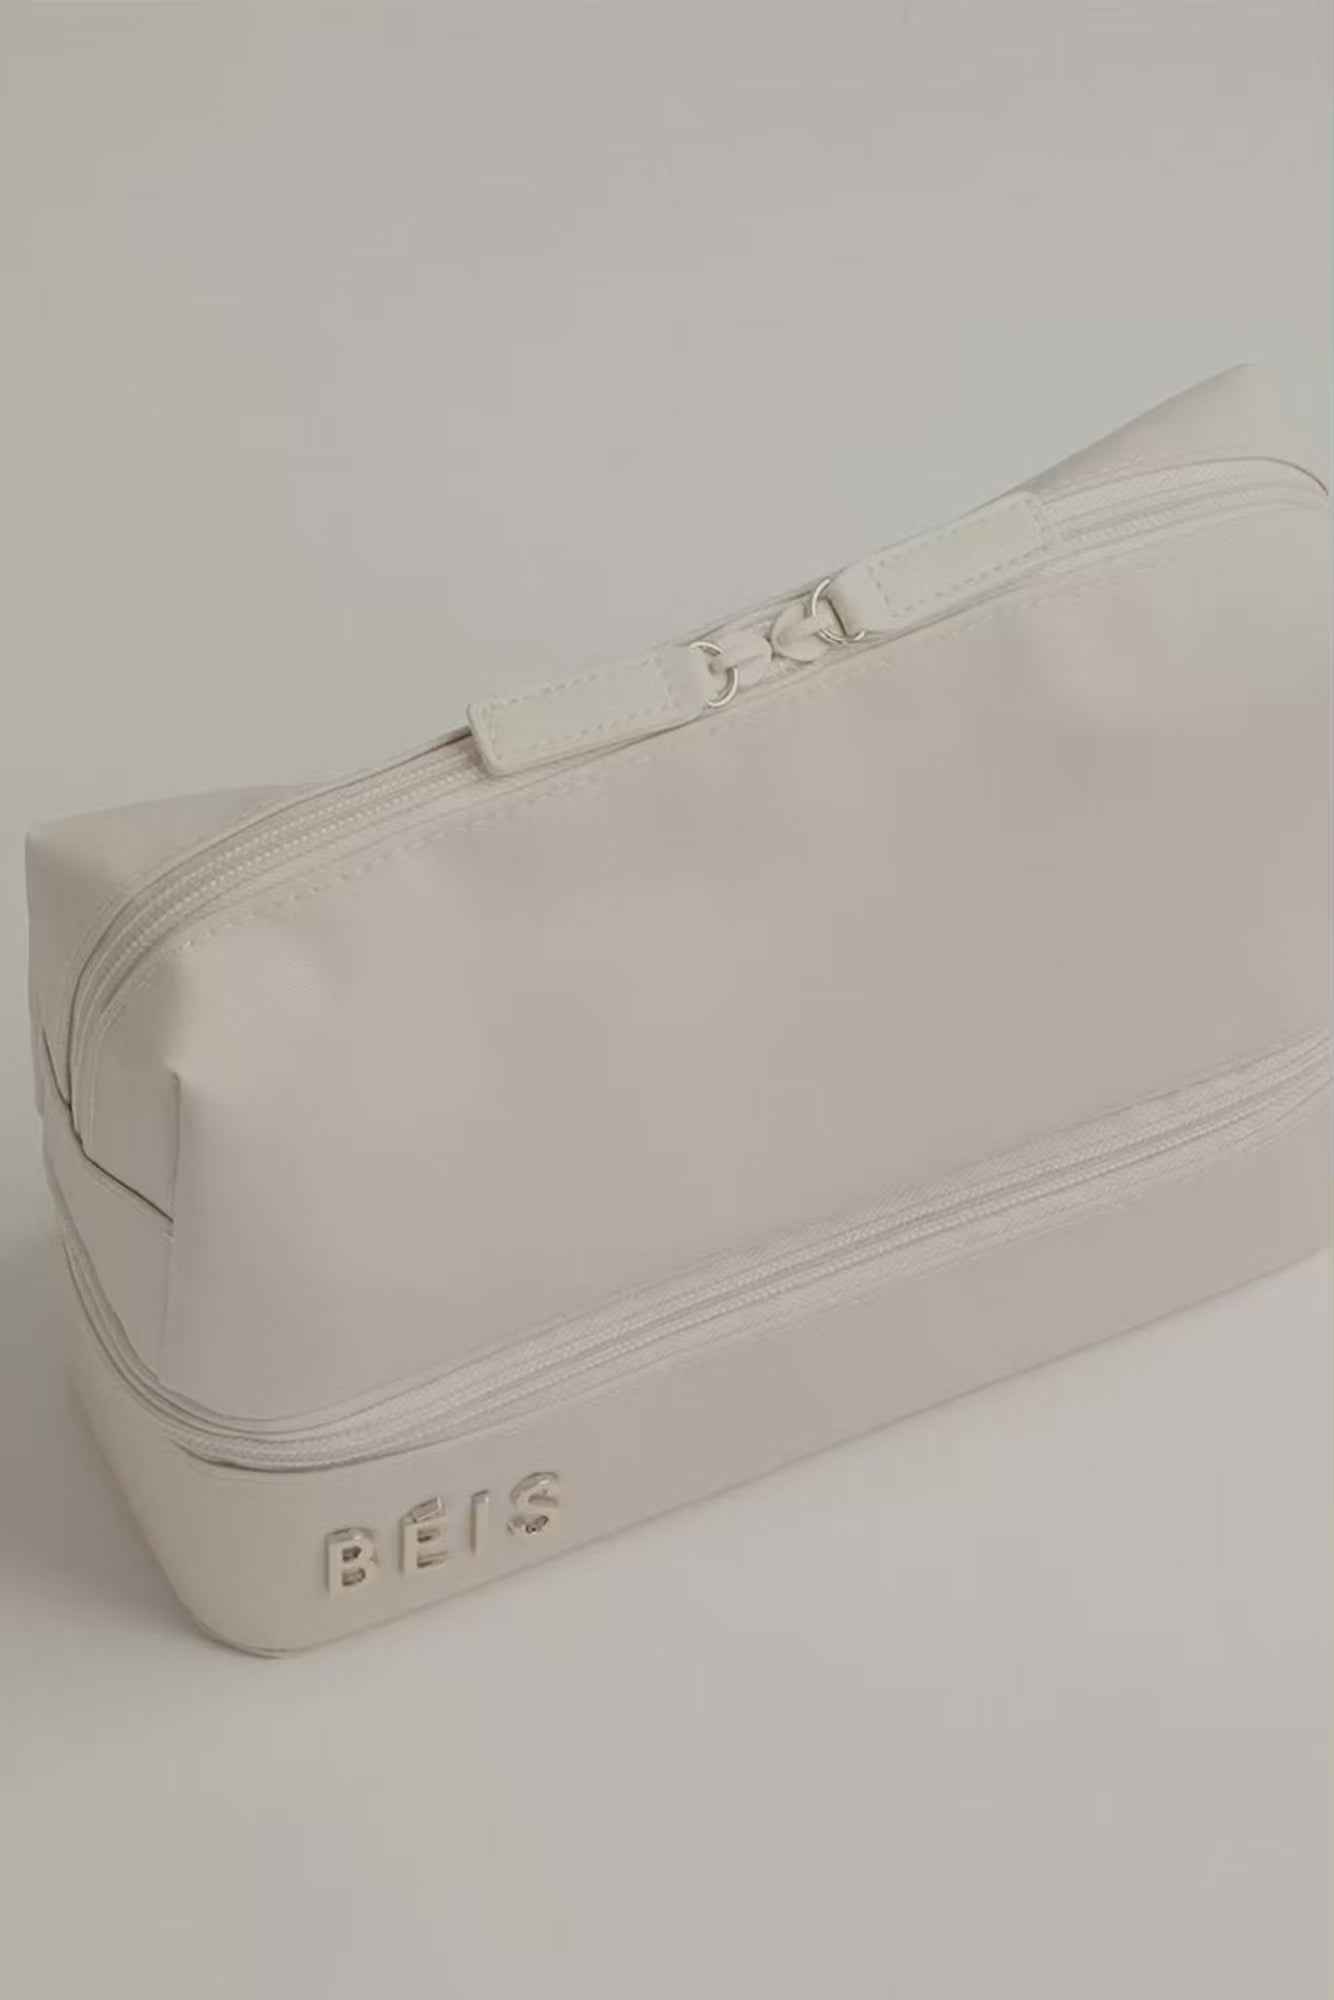 Béis Travel The Cosmetic Pouch Set in Beige